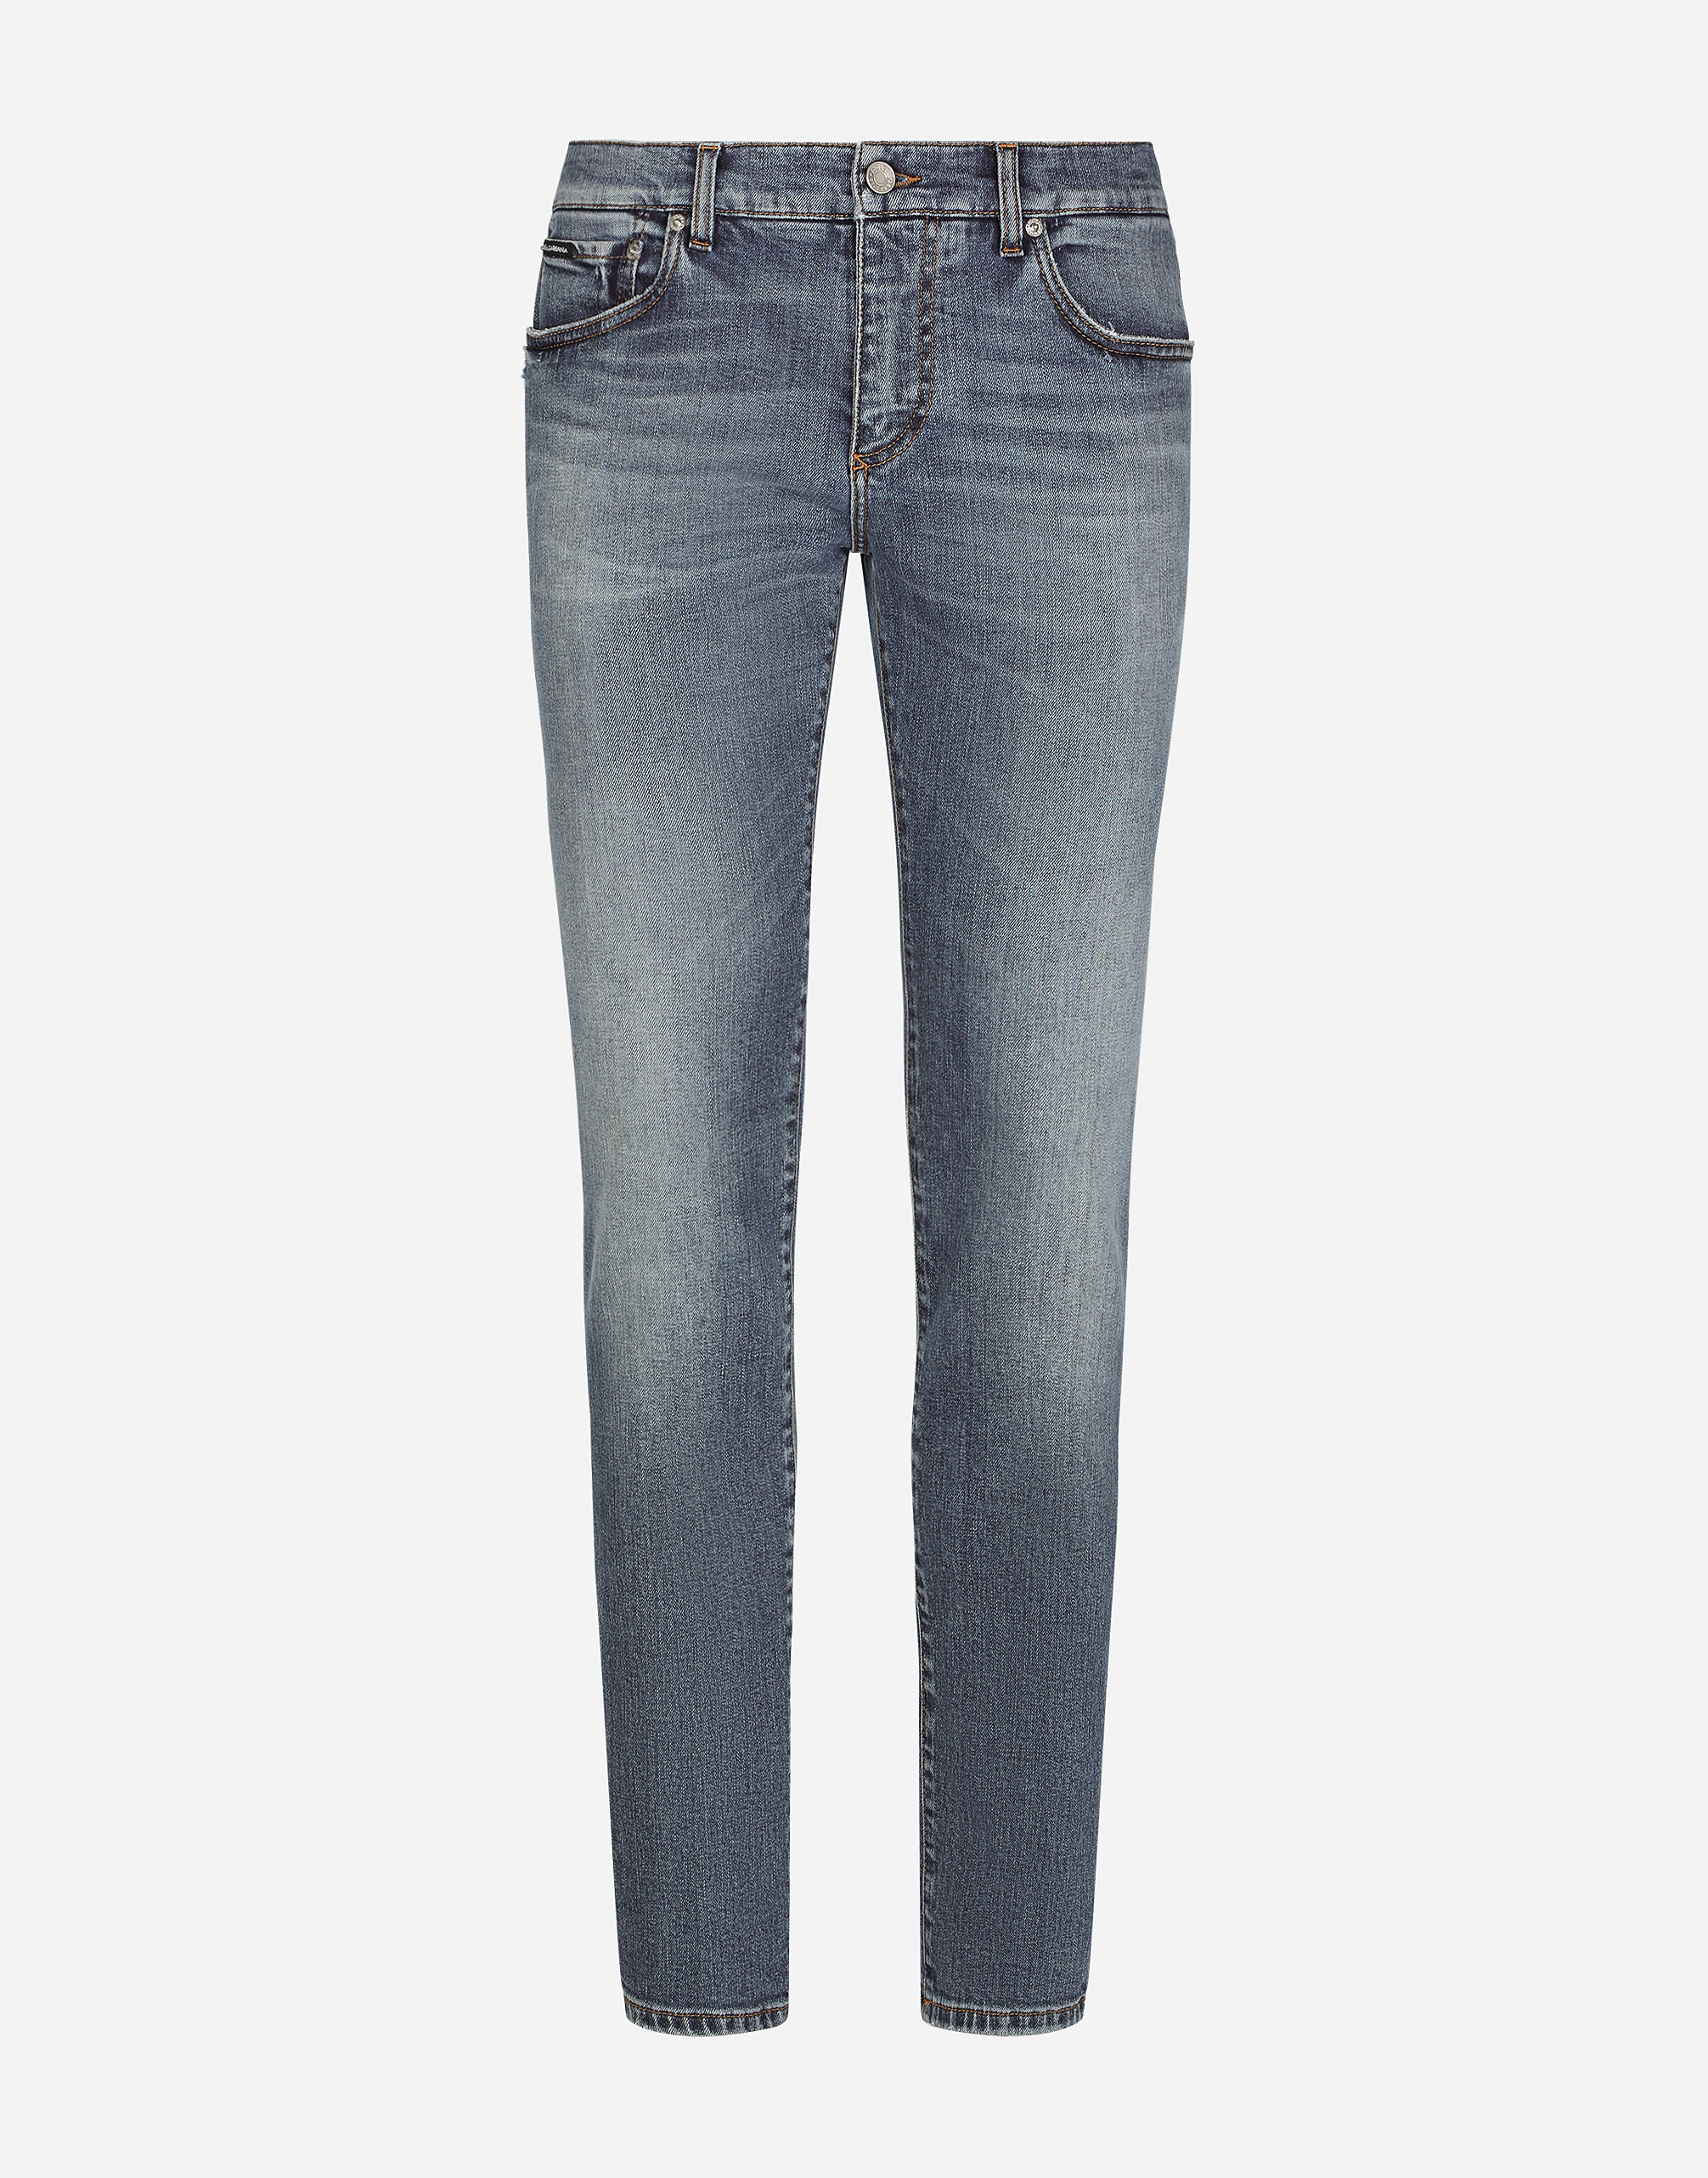 Dolce & Gabbana Light Blue Skinny Stretch Jeans With Whiskering In Multicolor